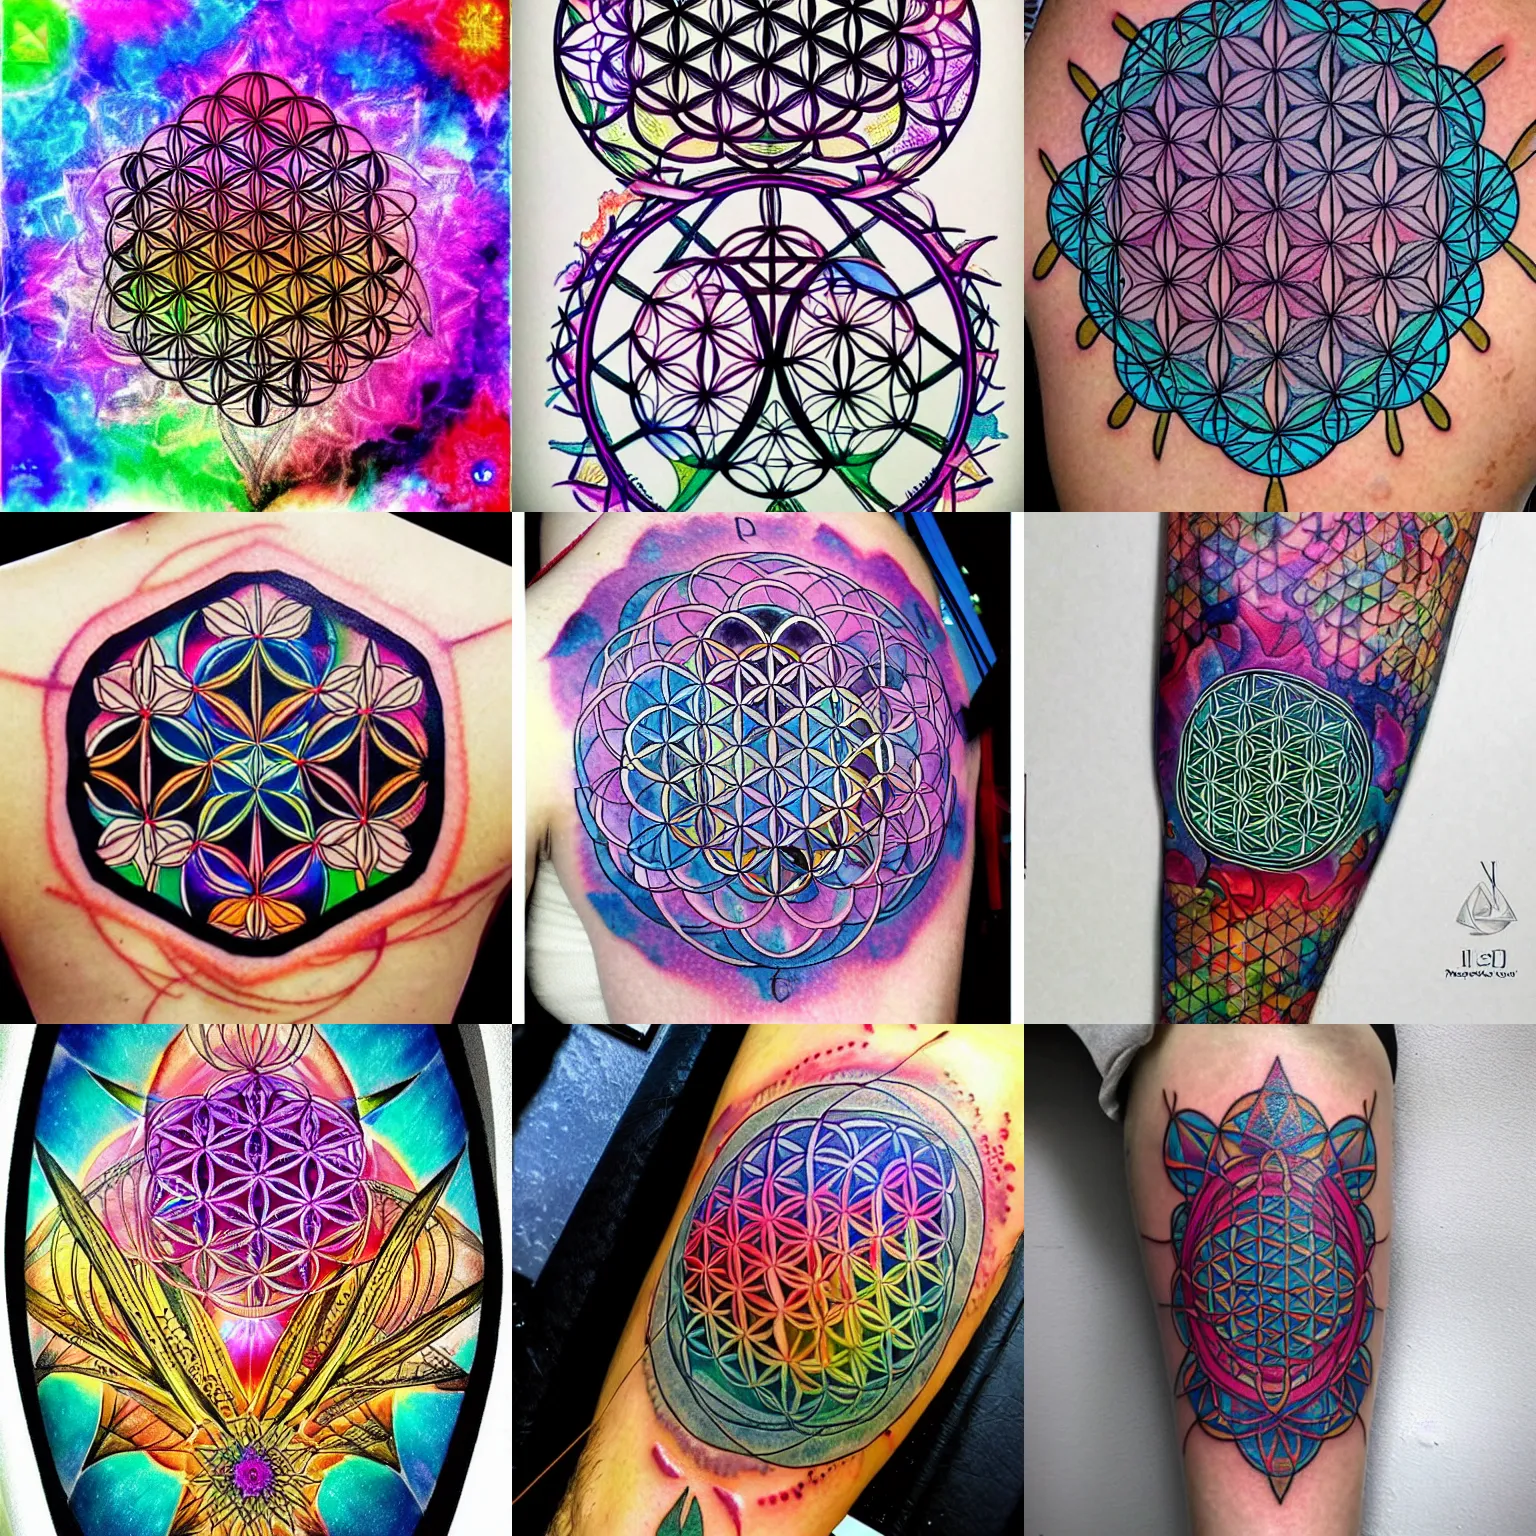 Prompt: Flower of life with dna strands going into the tree of life merkaba background colorful, detailed tattoo art